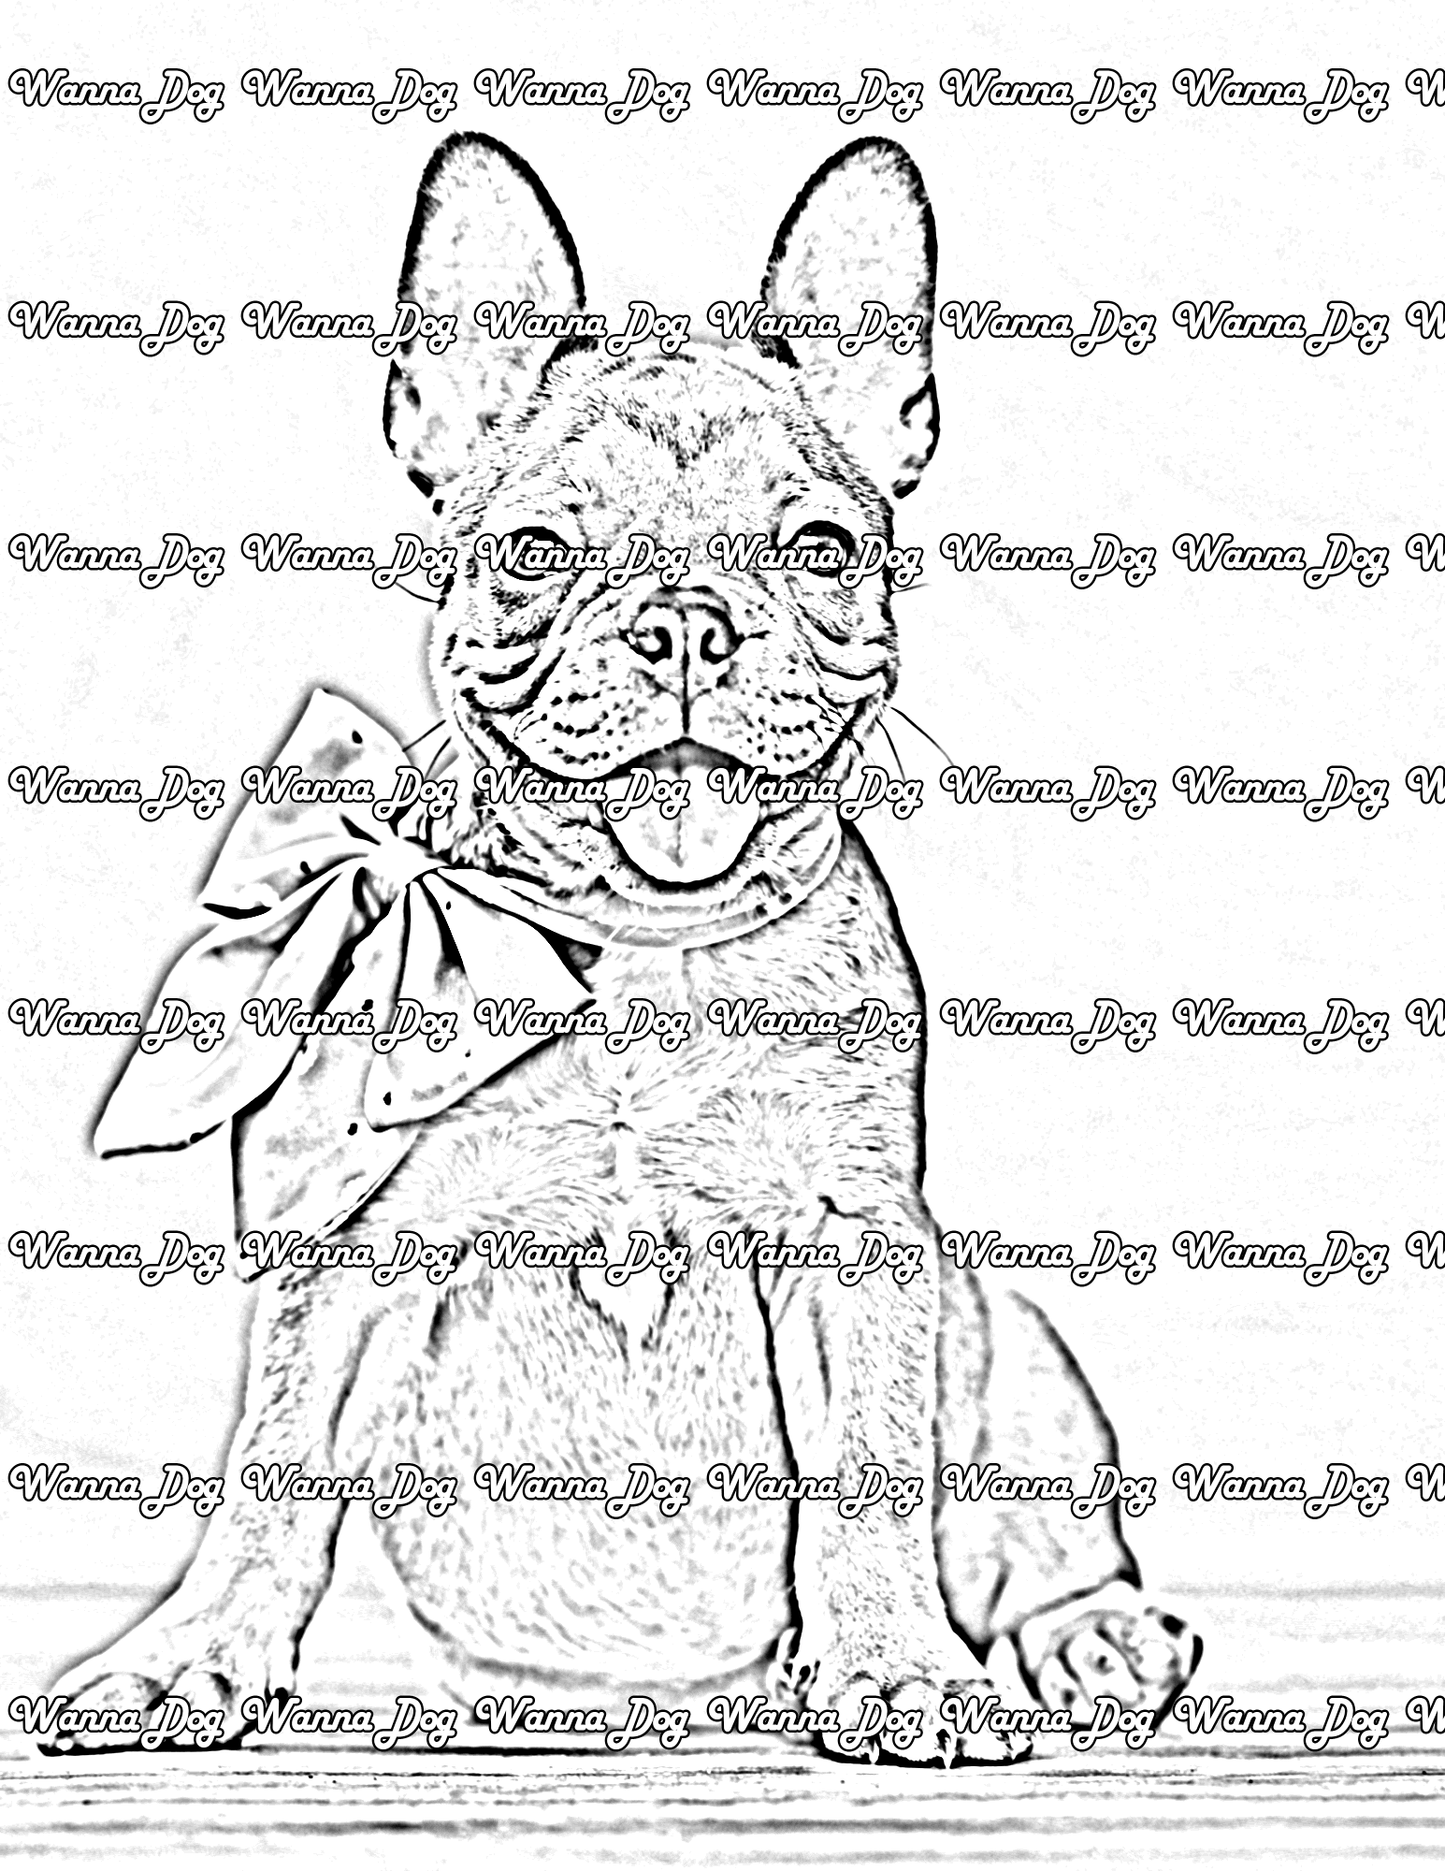 Bulldog Puppy Coloring Page of a Bulldog Puppy with their tongue out